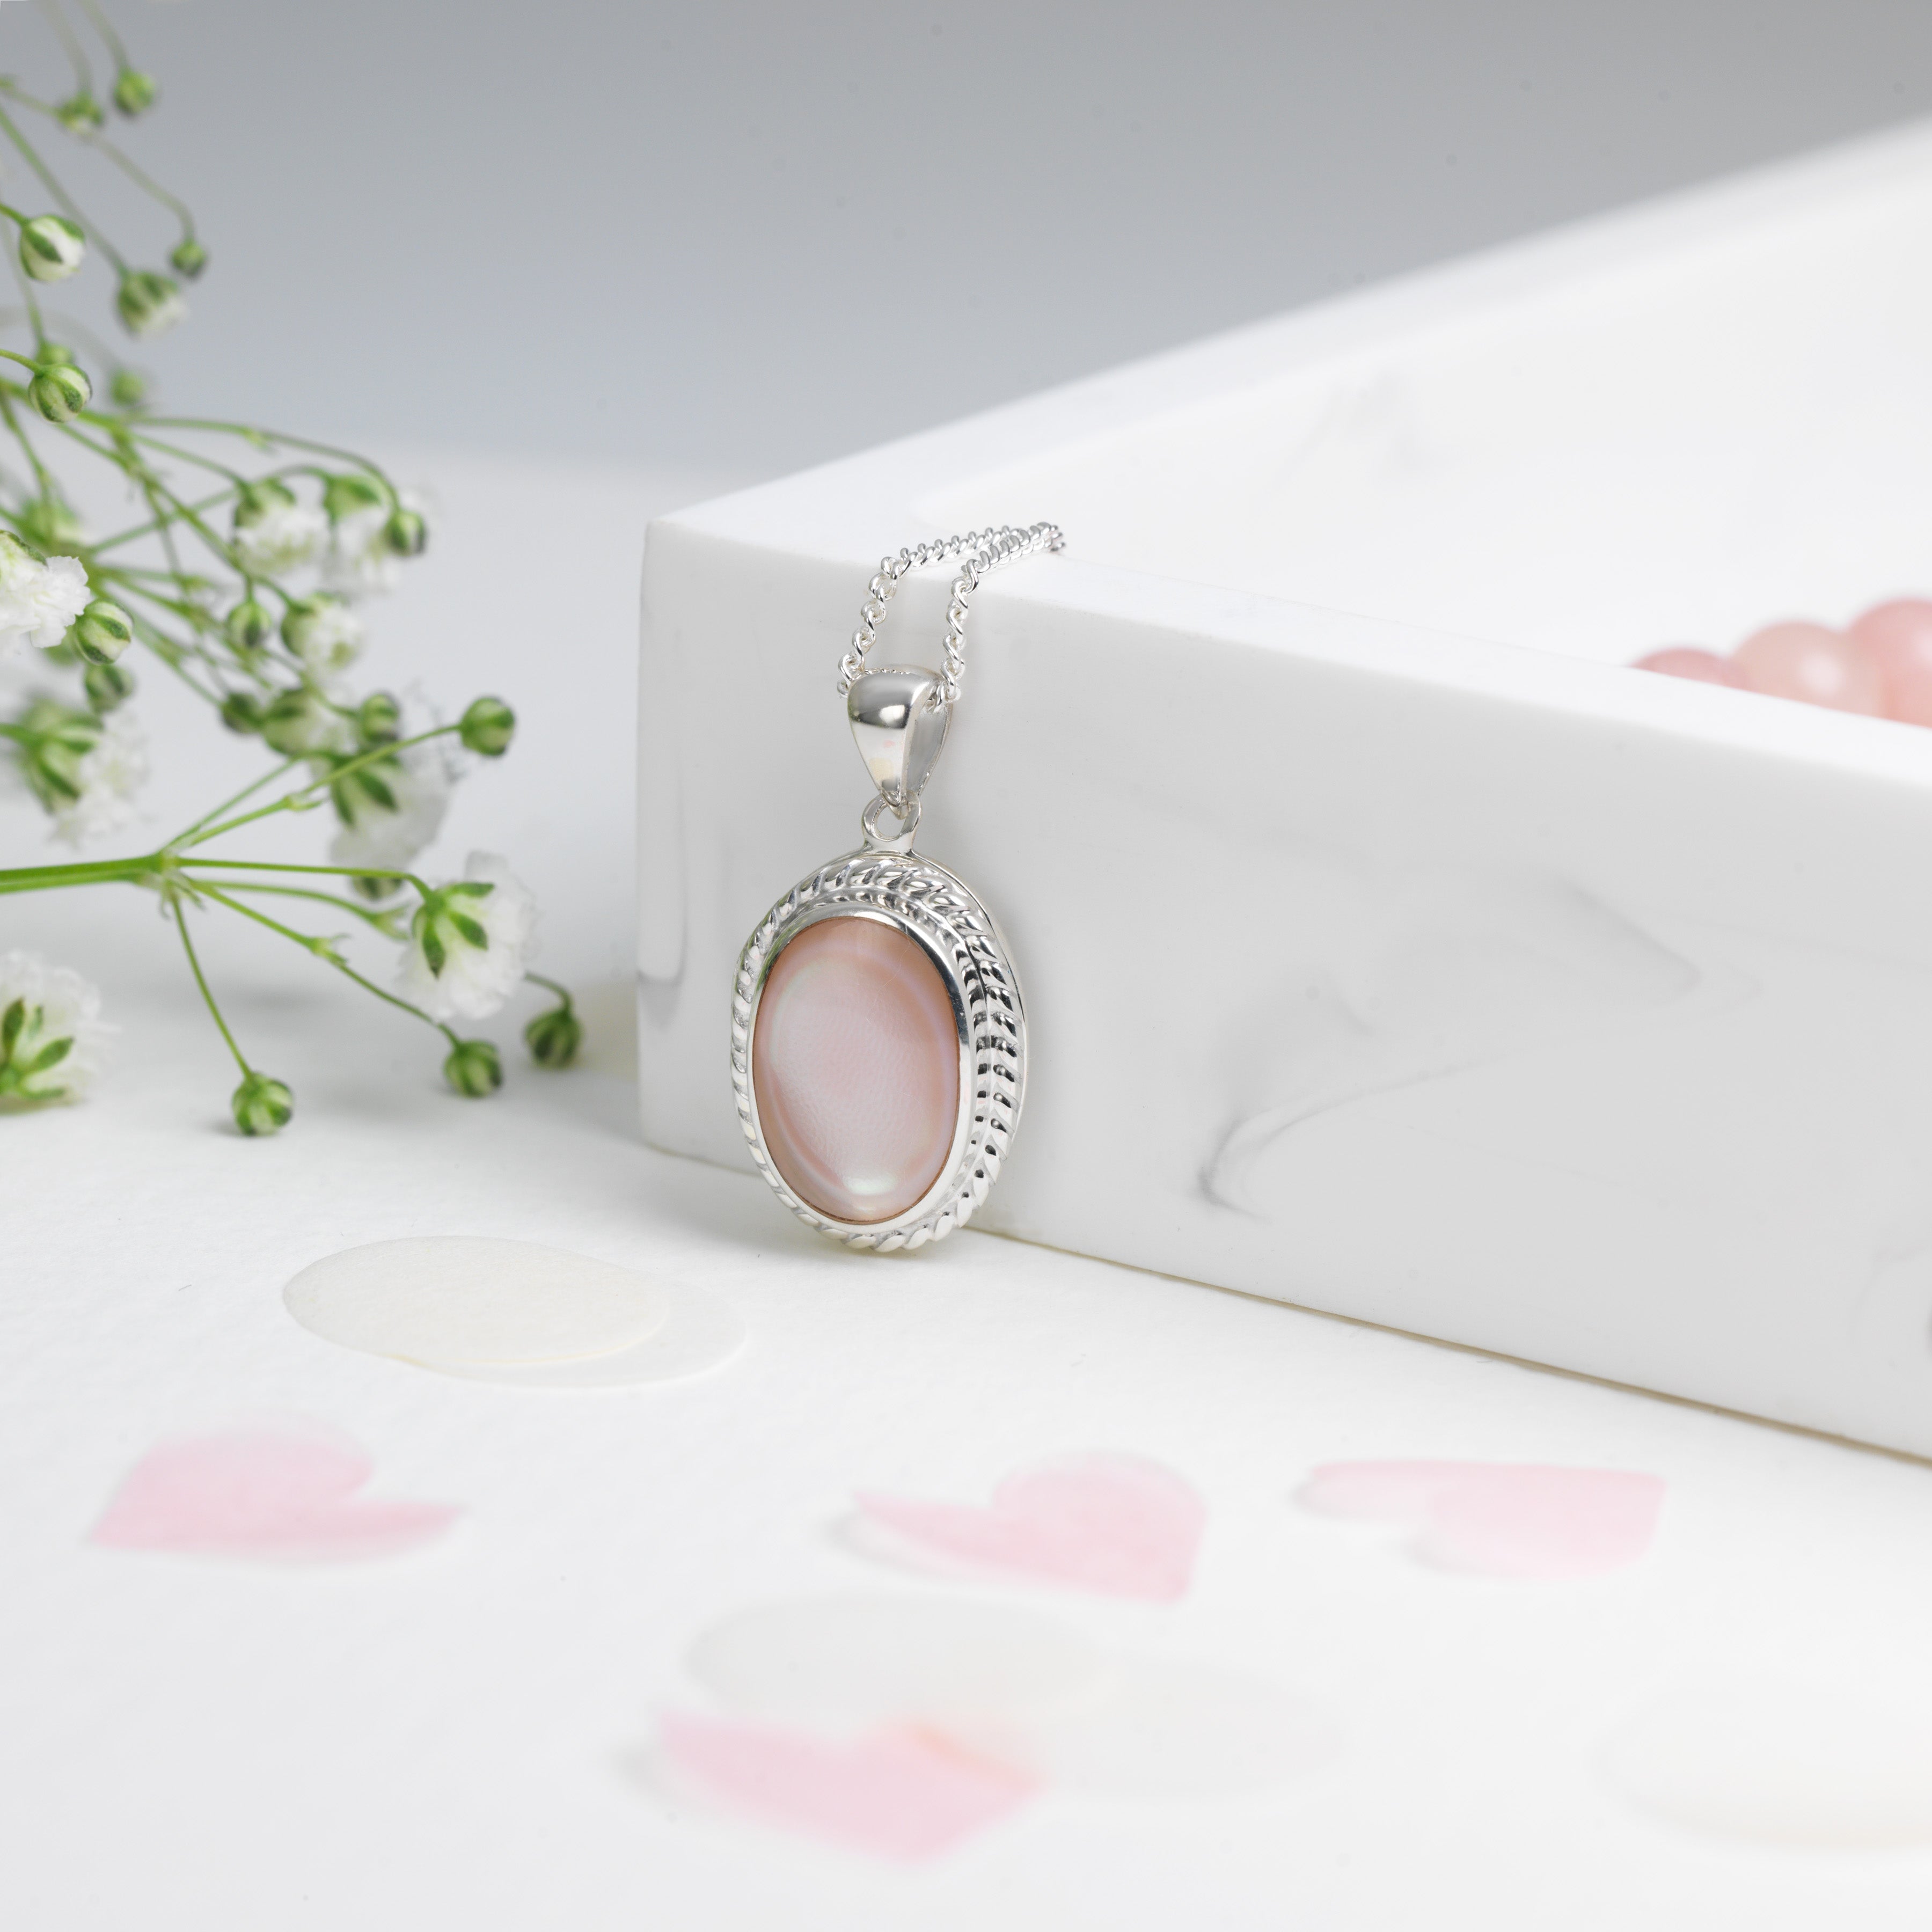 Product title: Petite Pink Mother of Pearl Oval Locket, product type: Locket